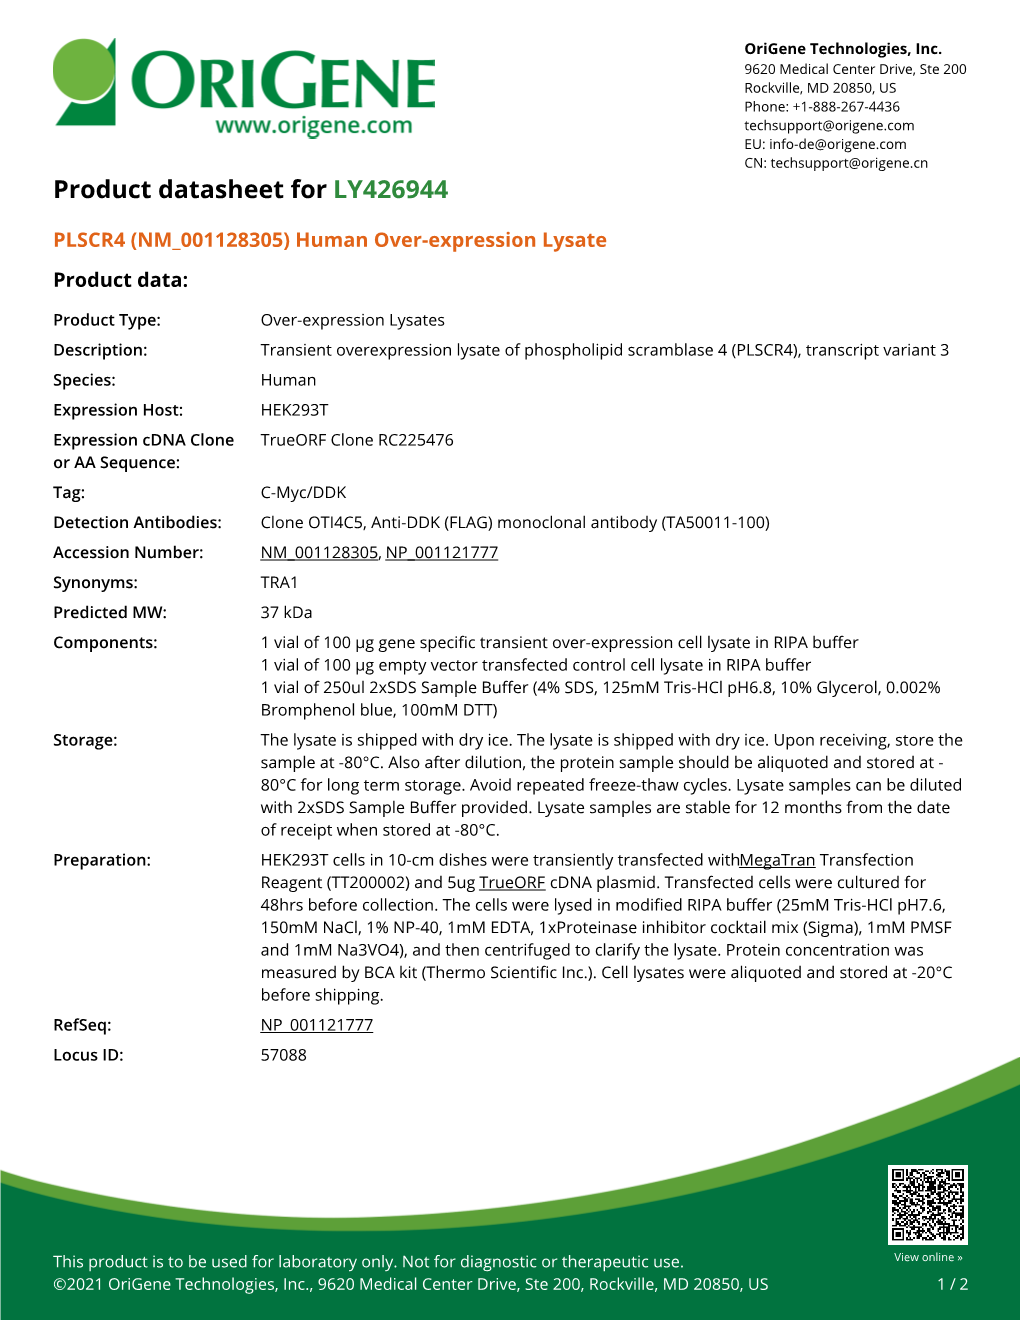 PLSCR4 (NM 001128305) Human Over-Expression Lysate Product Data